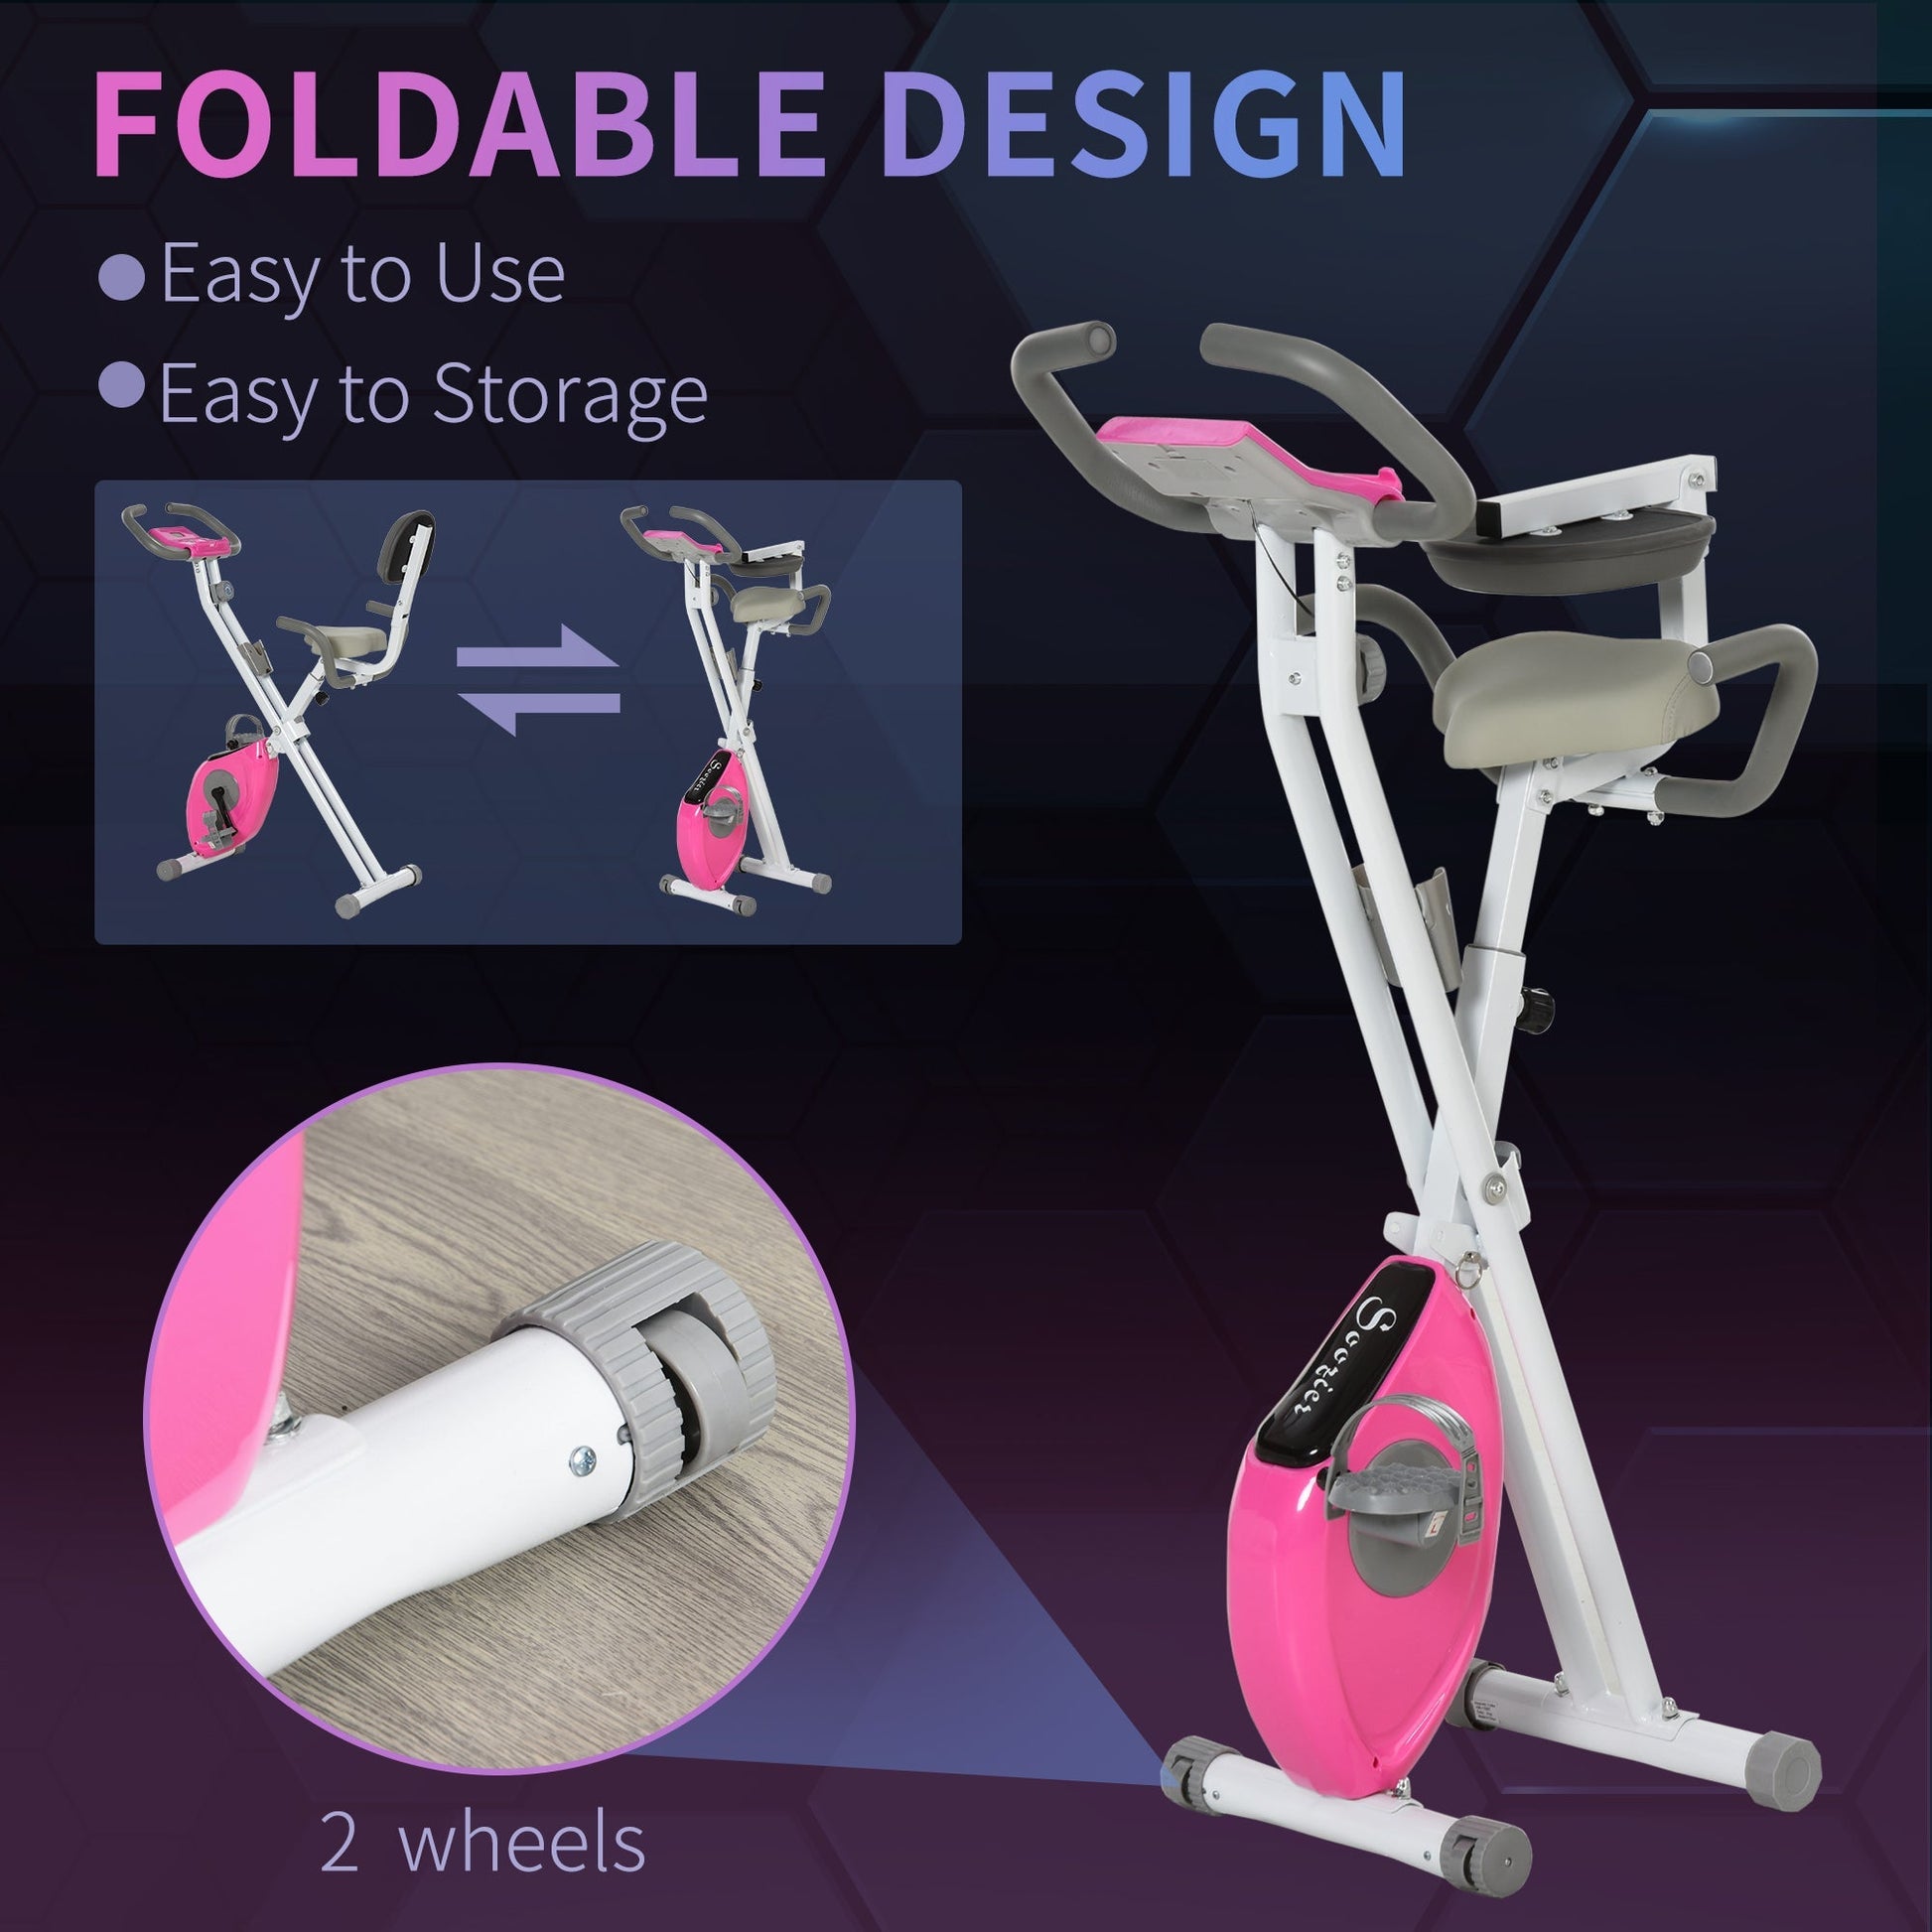 Foldable Magnetic Exercise Bike Indoor Stationary Upright Fitness Bike Pink at Gallery Canada